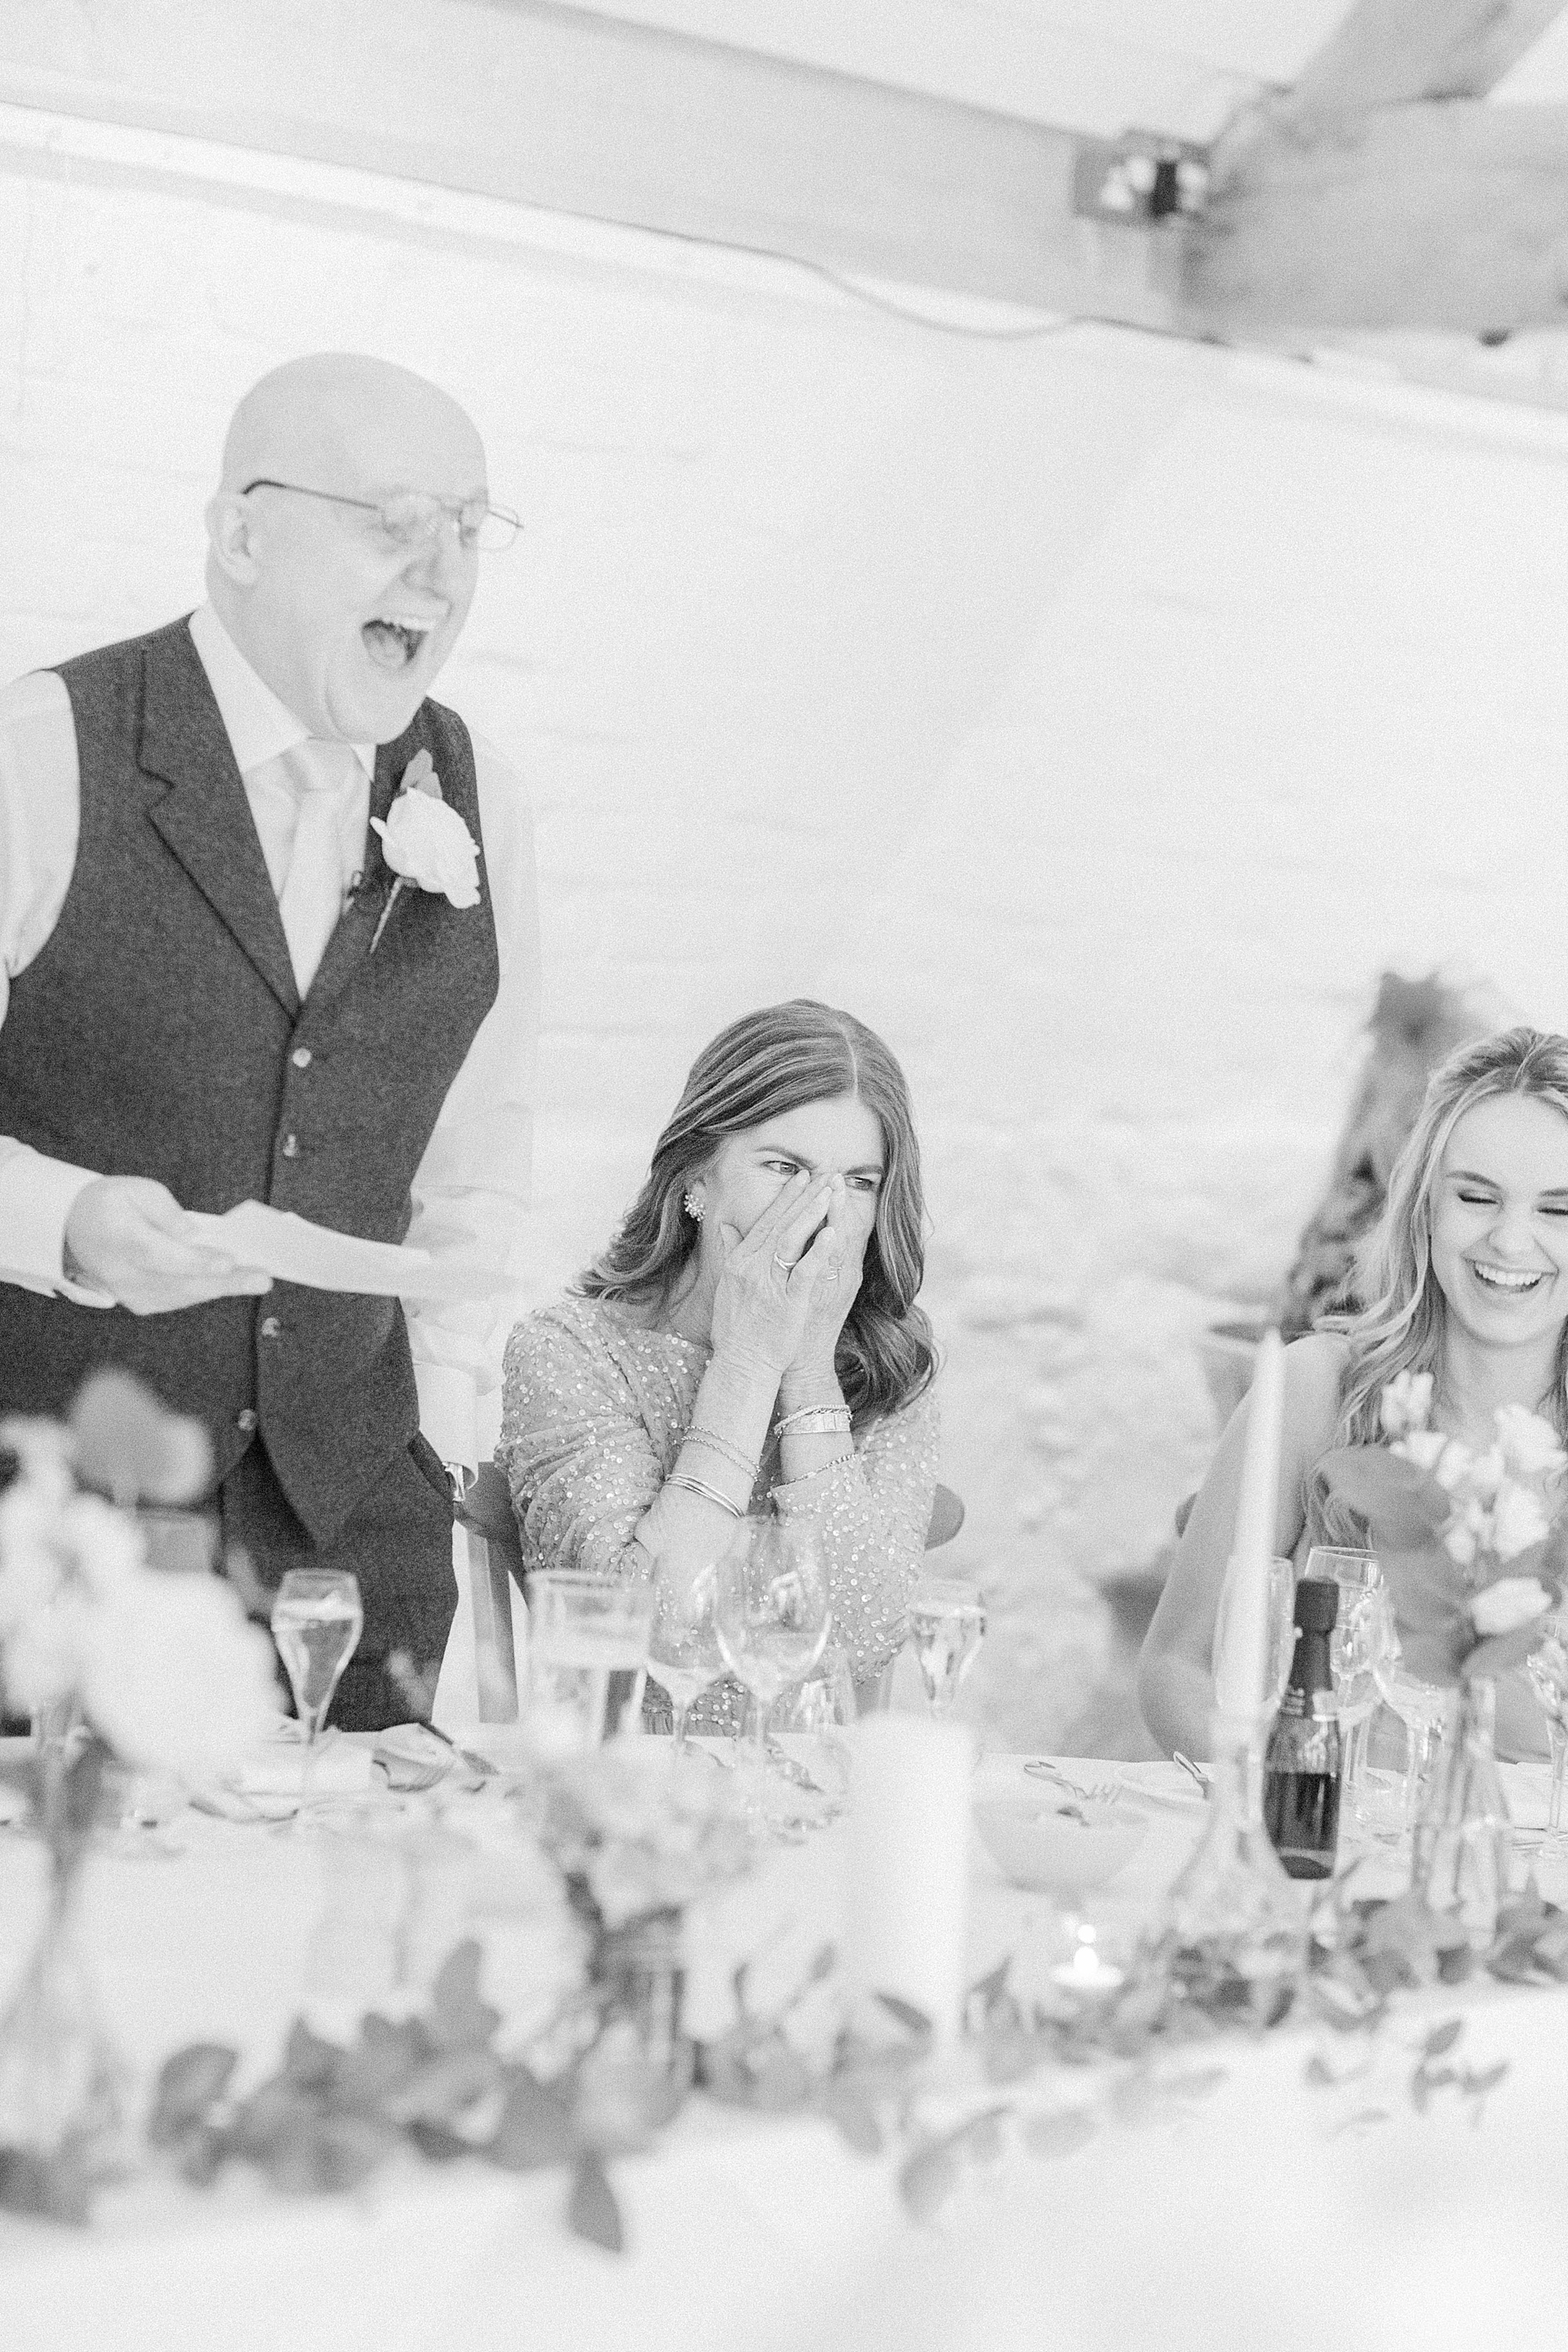 photo of the speech at a wedding by the father of the bride and his wife's and bridesmaid's reaction